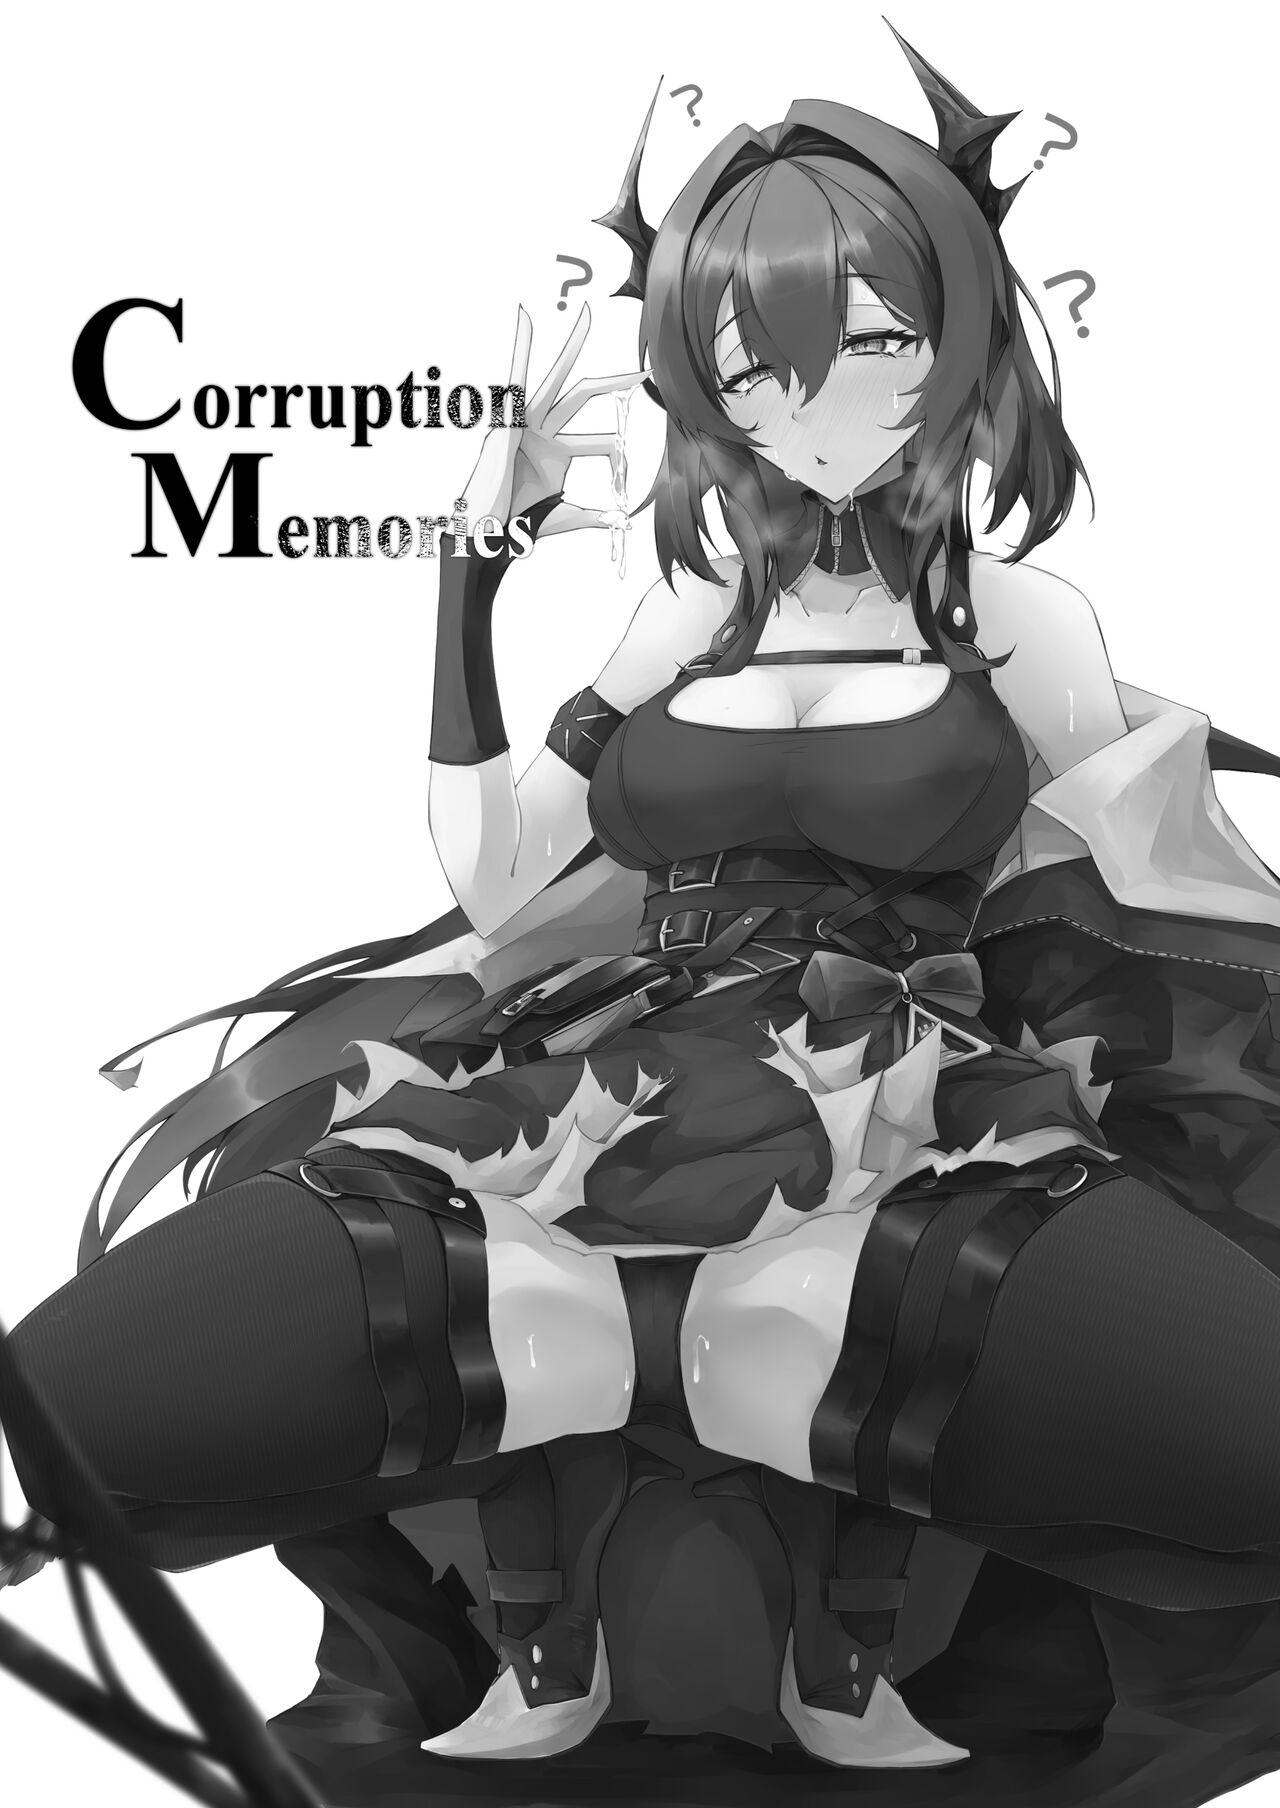 Squirting Corruption Memories - Arknights Gemendo - Picture 2